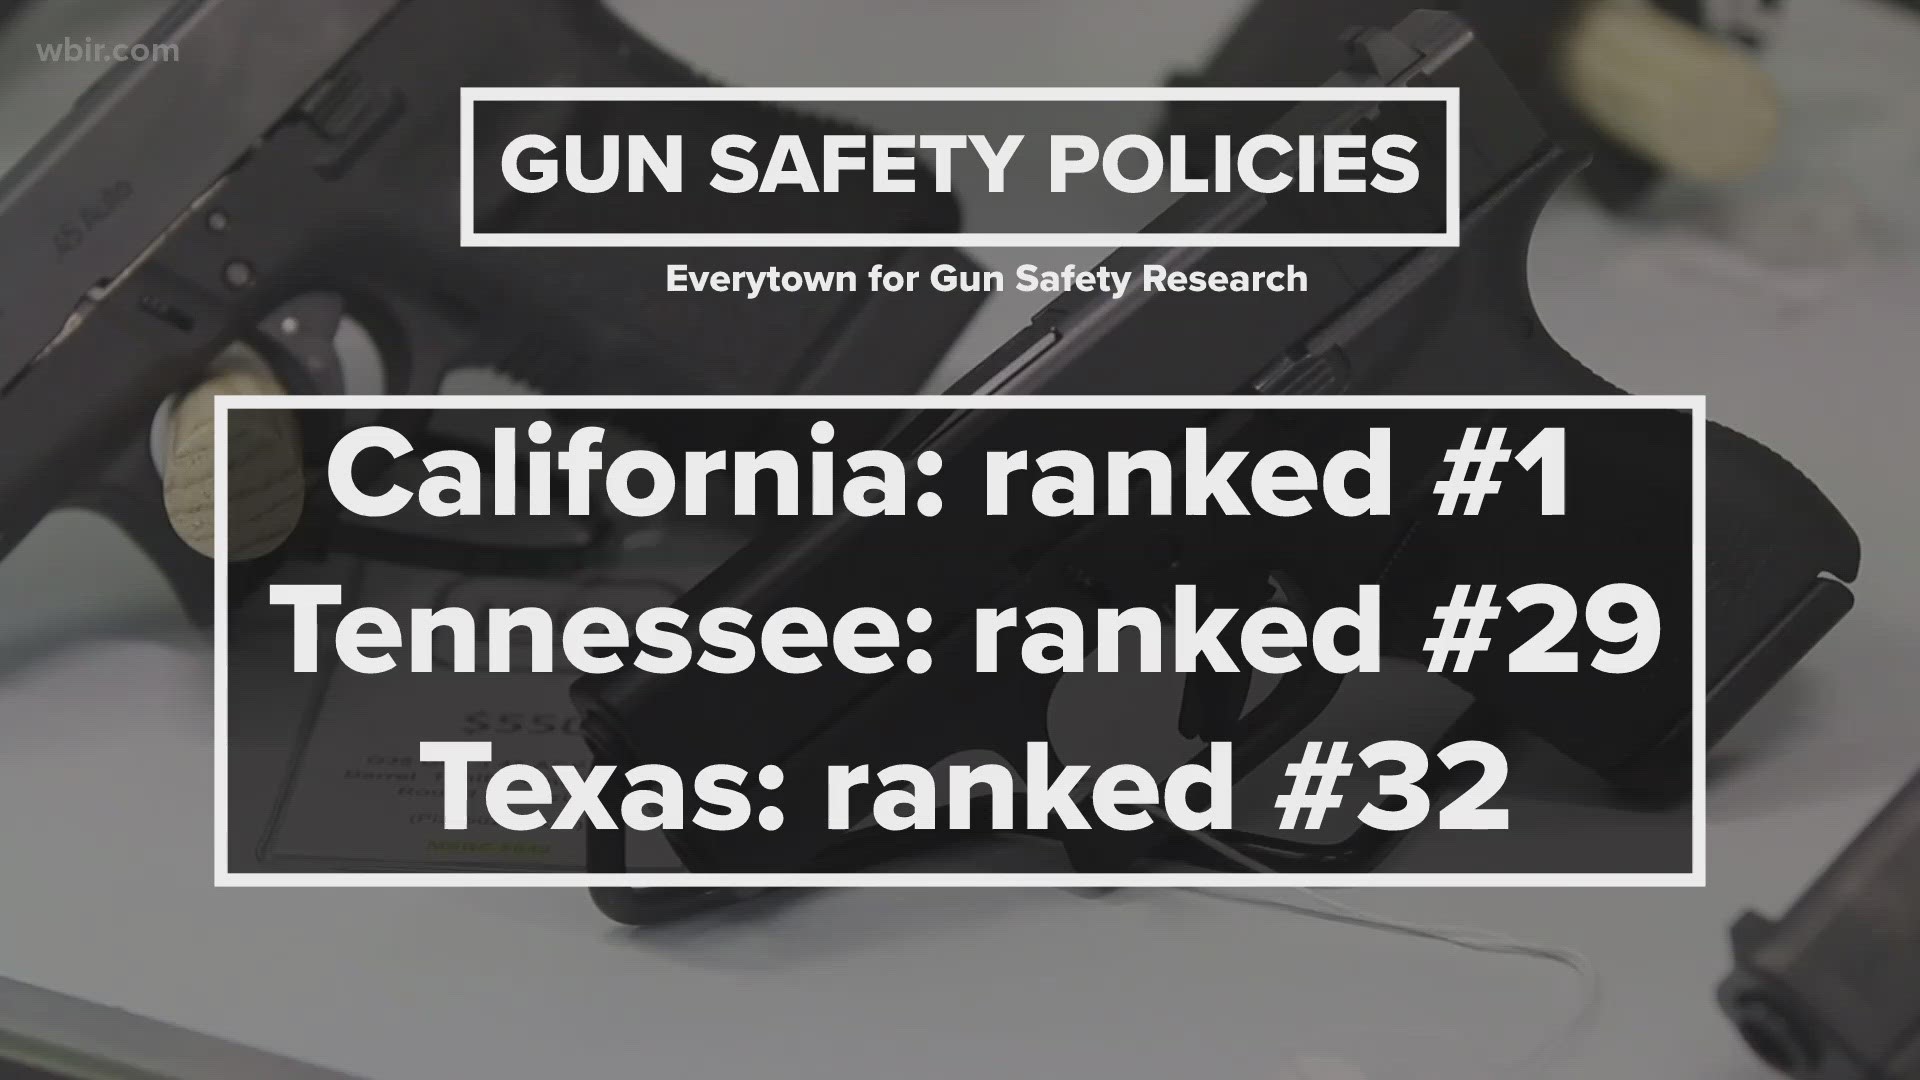 According to Every Town Research, which ranks states based on their gun safety policies, California takes the top spot and Tennessee is at 29.